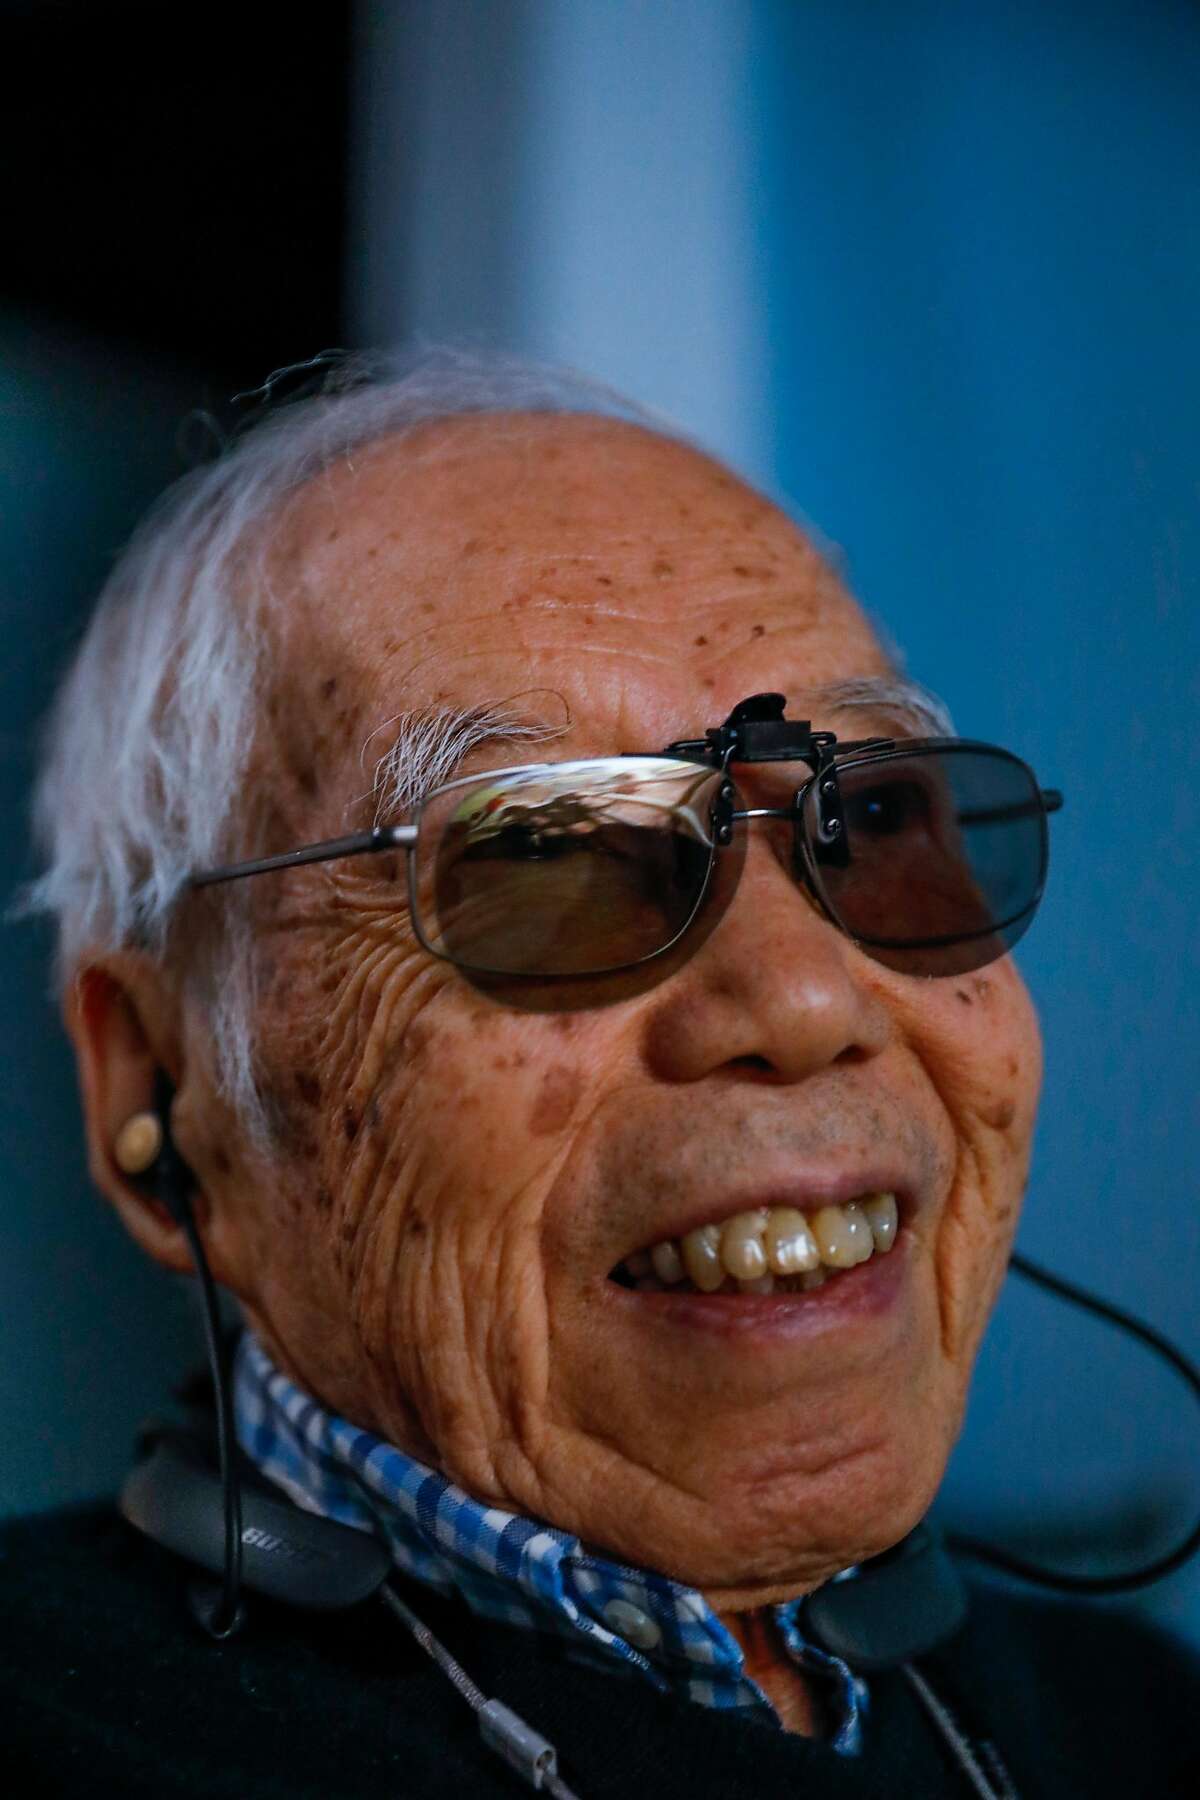 Chia Liang LI watches a video that uses 3scape, an immersive 3D experience while wearing special clip-on glasses at the Sunny View Bay Area Retirement Center on Wednesday, Feb. 12, 2020 in Cupertino, California.